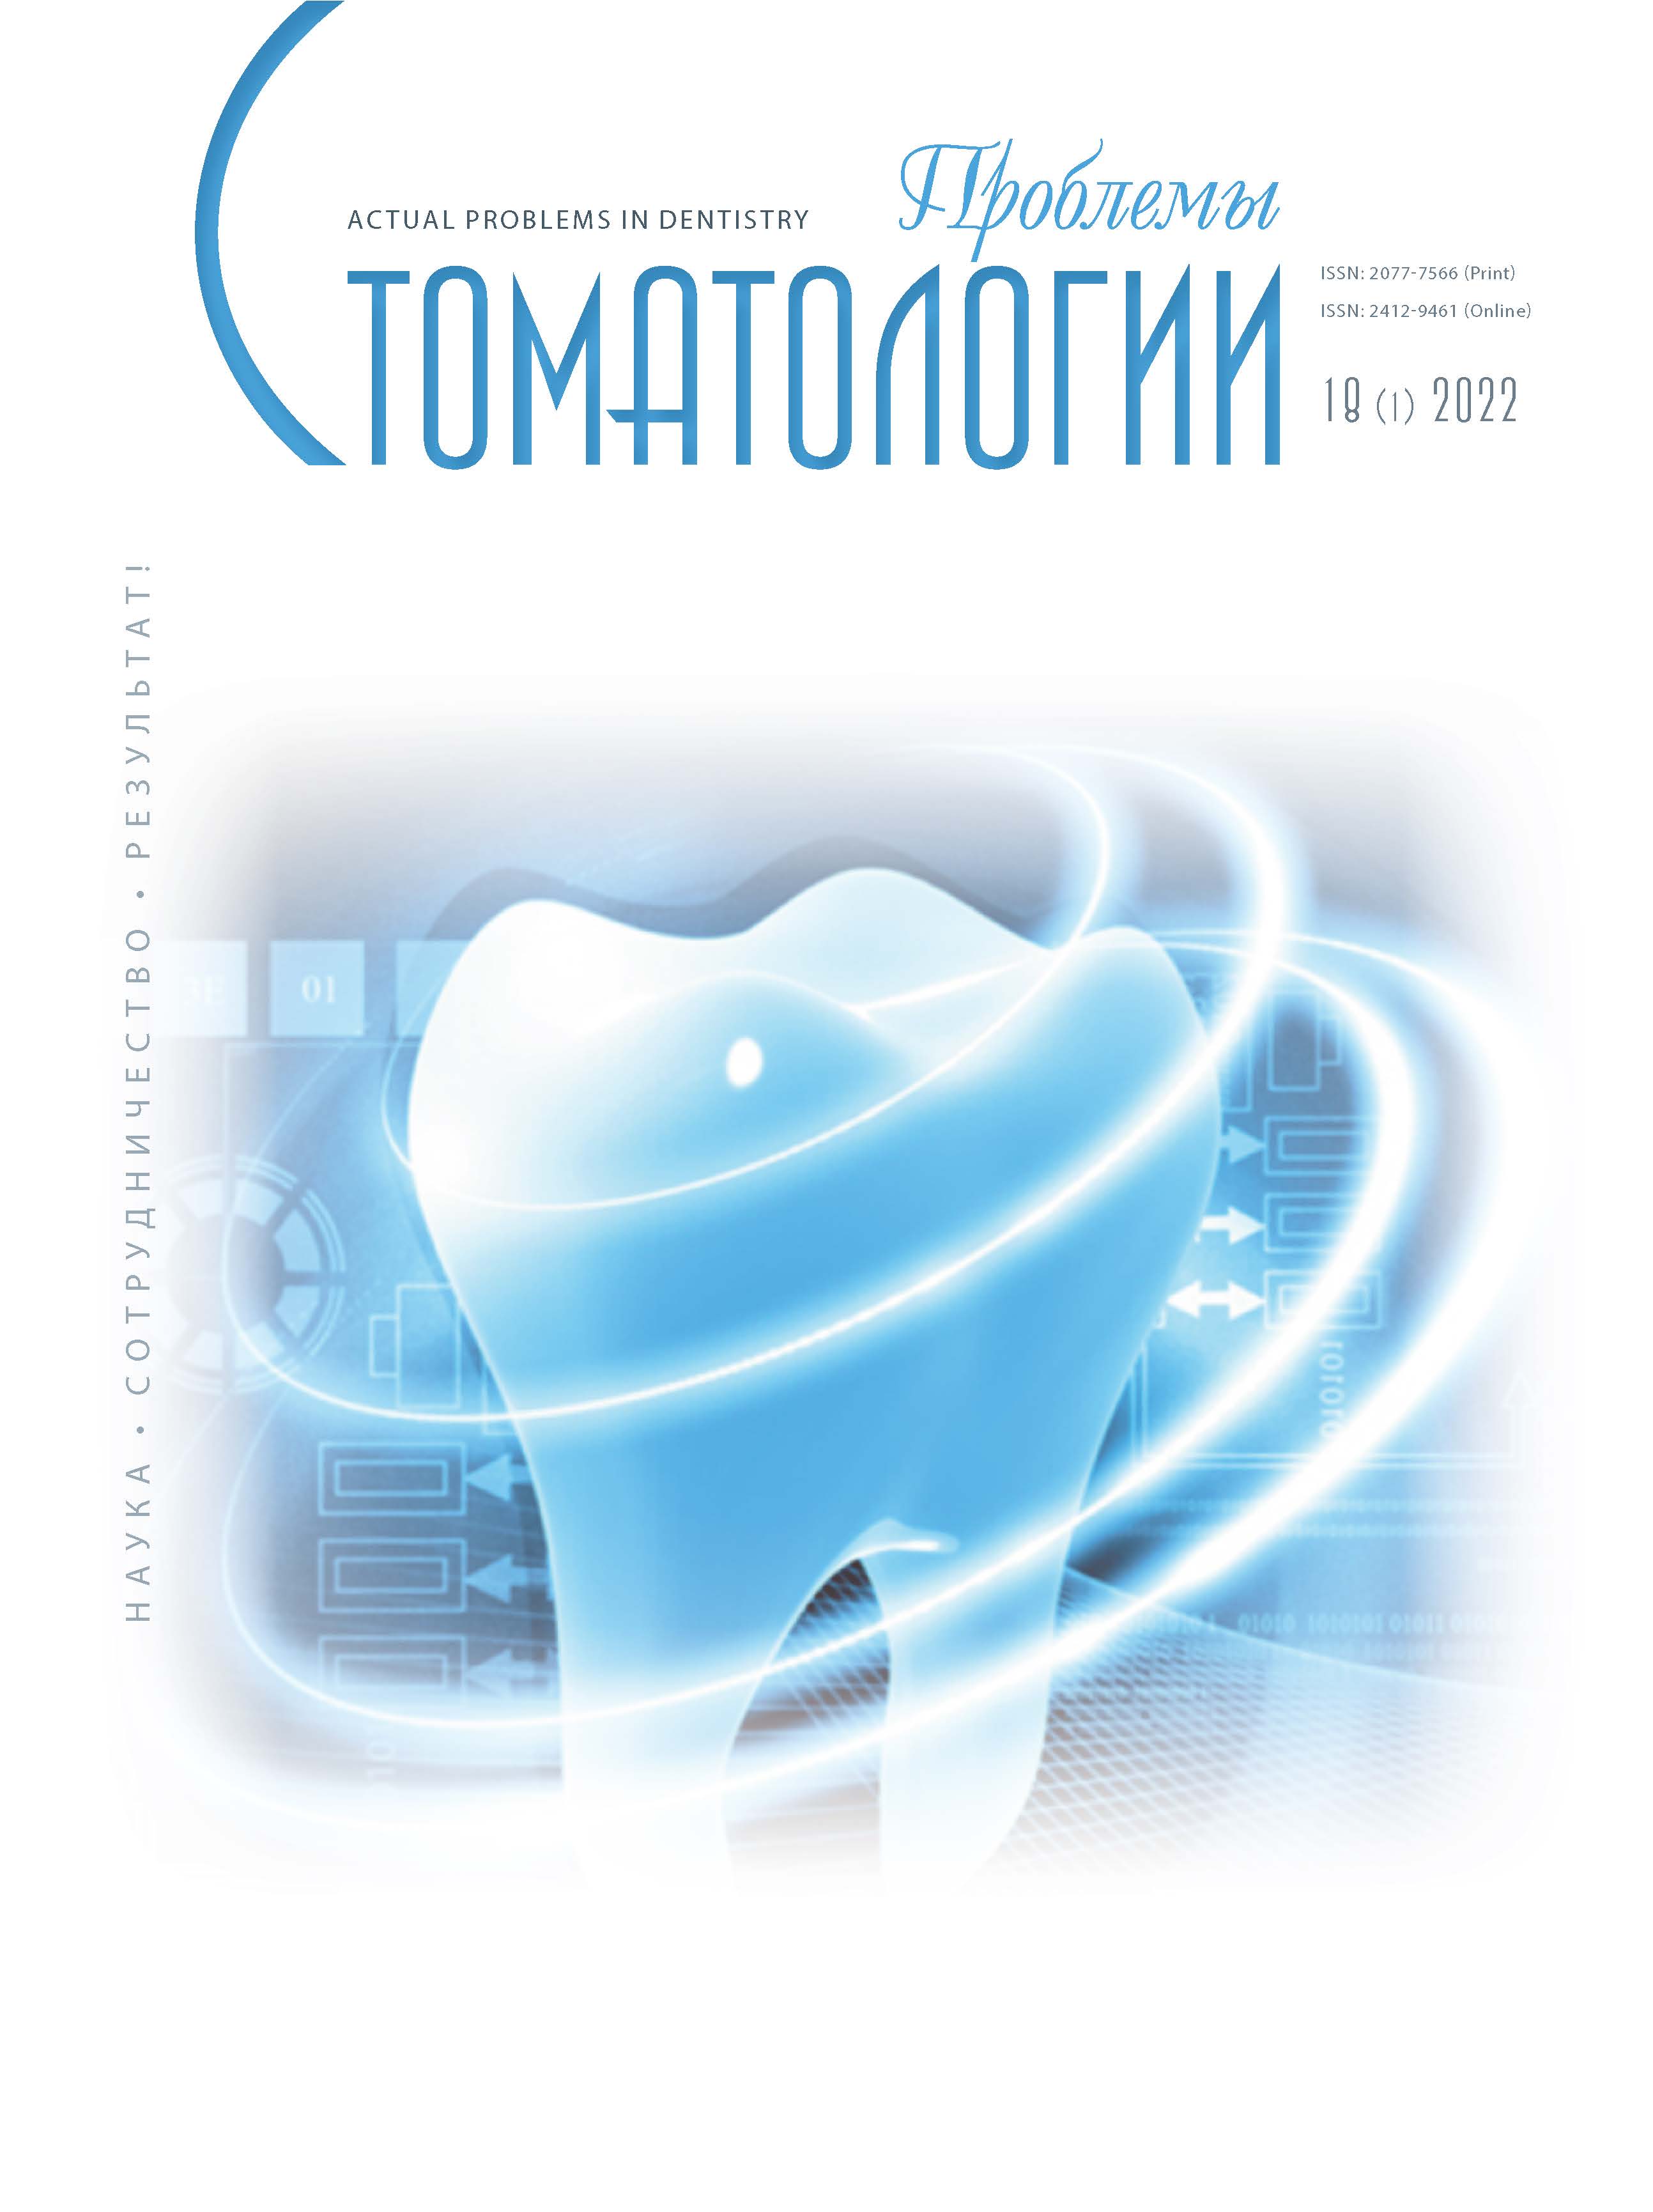                         PROSPECTS FOR THE USE OF DIGITAL SCANNING IN THE DYNAMIC EVALUATION OF PROSTHETIC BED TISSUES IN ORTHOPEDIC DENTISTRY
            